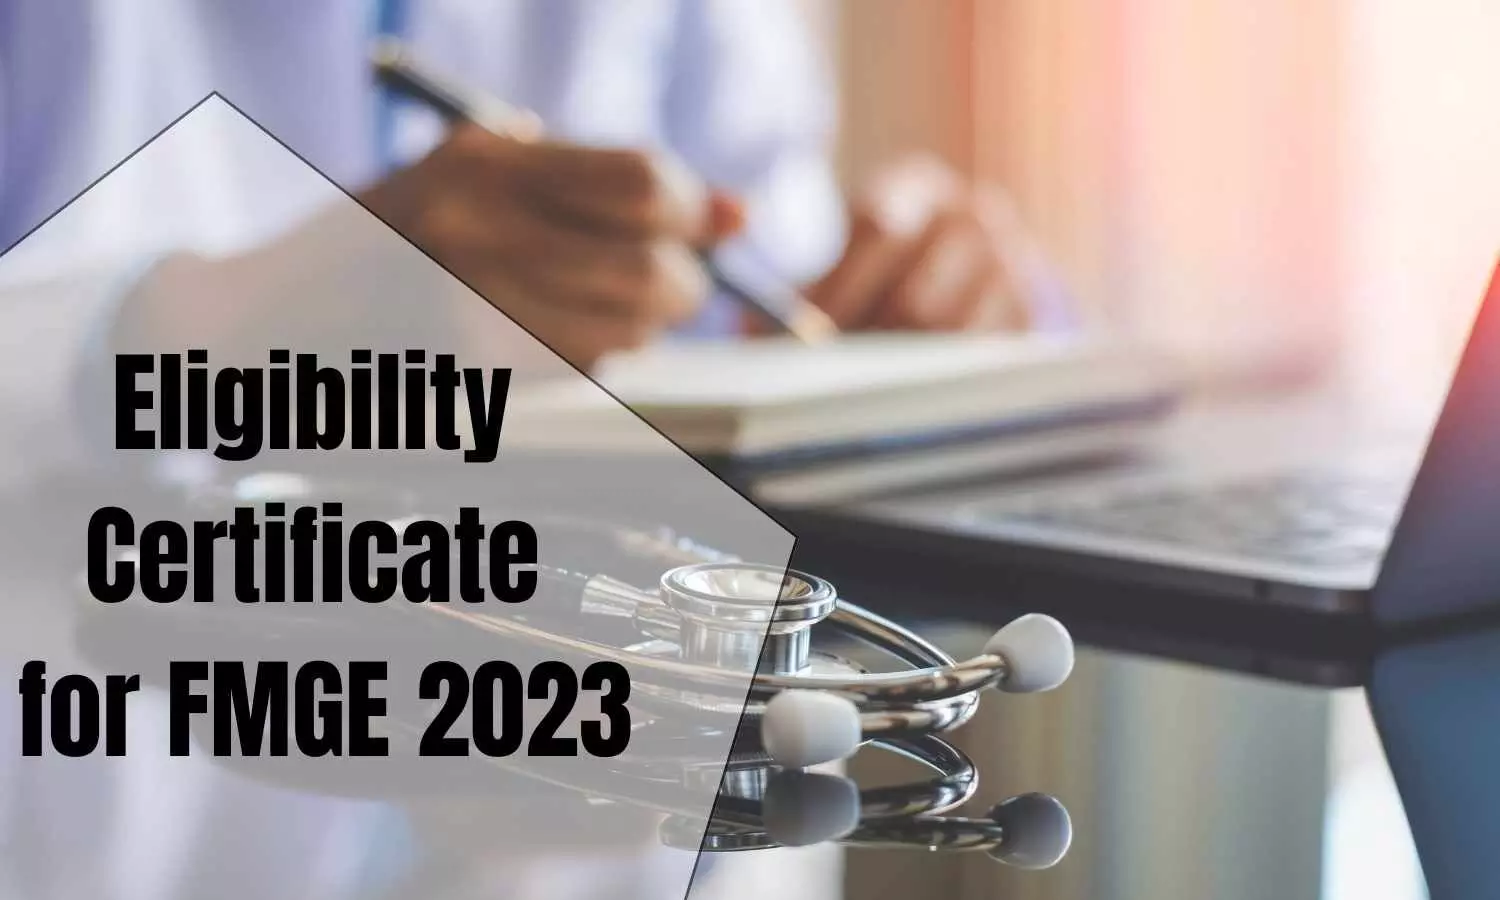 NMC gives deadline to FMGE June 2023 candidates applying for Eligibility Certificate